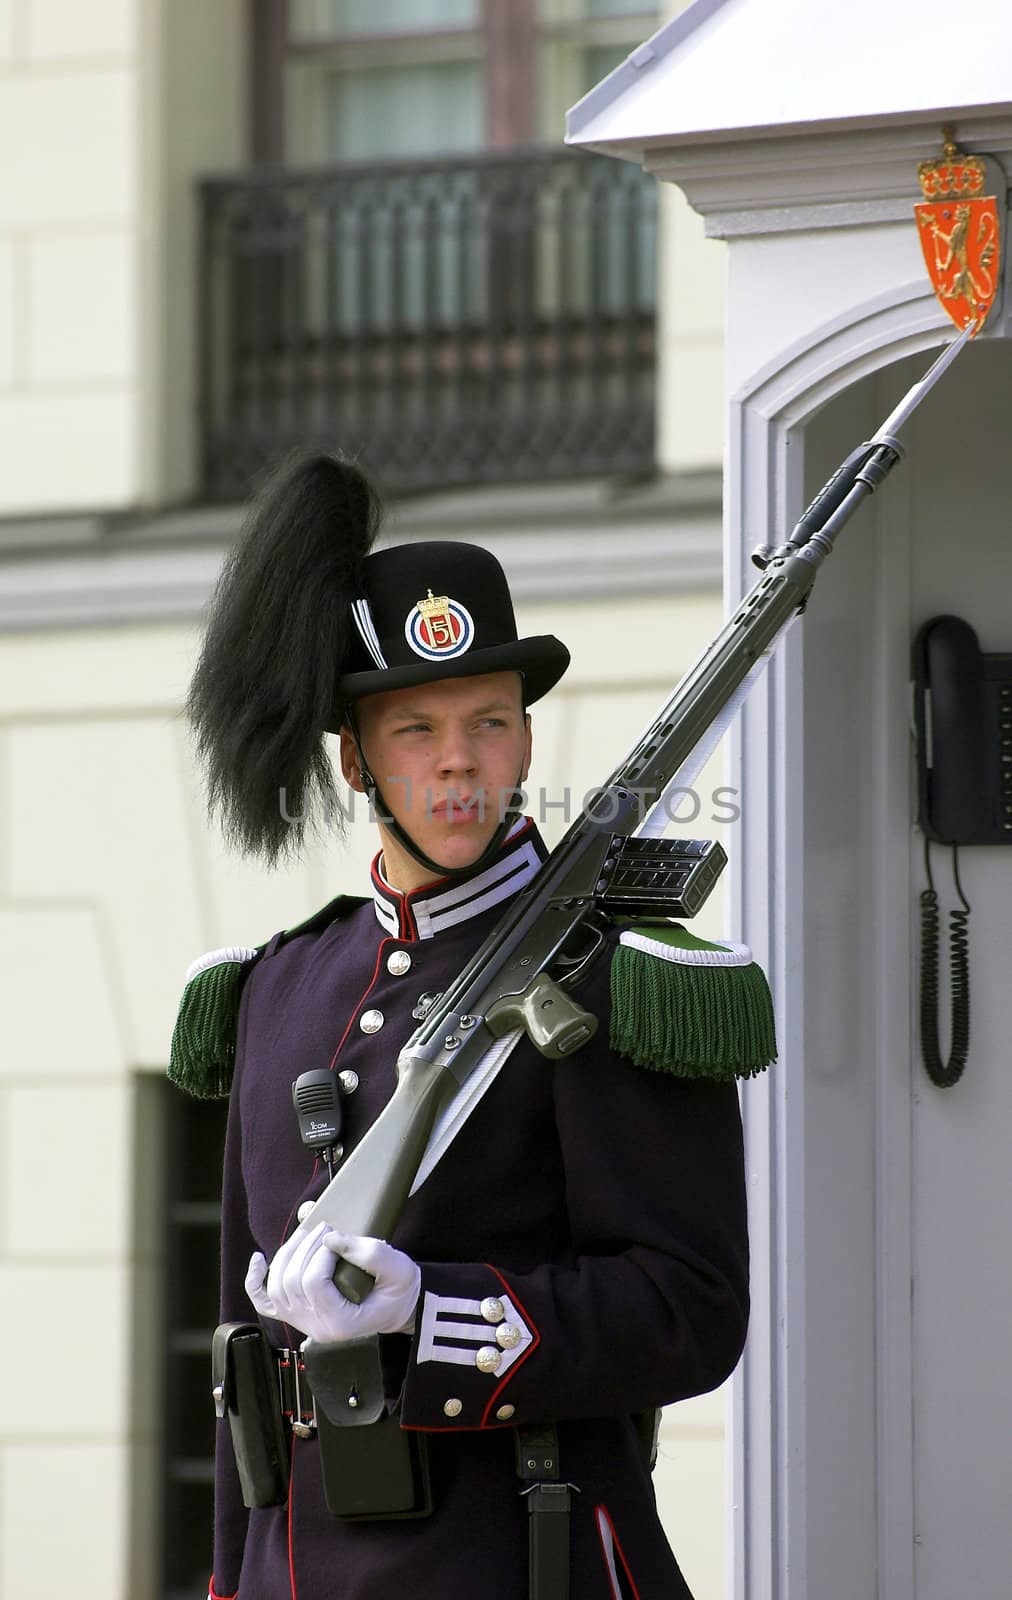 Guard/Soldier on duty guarding the royal castle in Oslo Norway